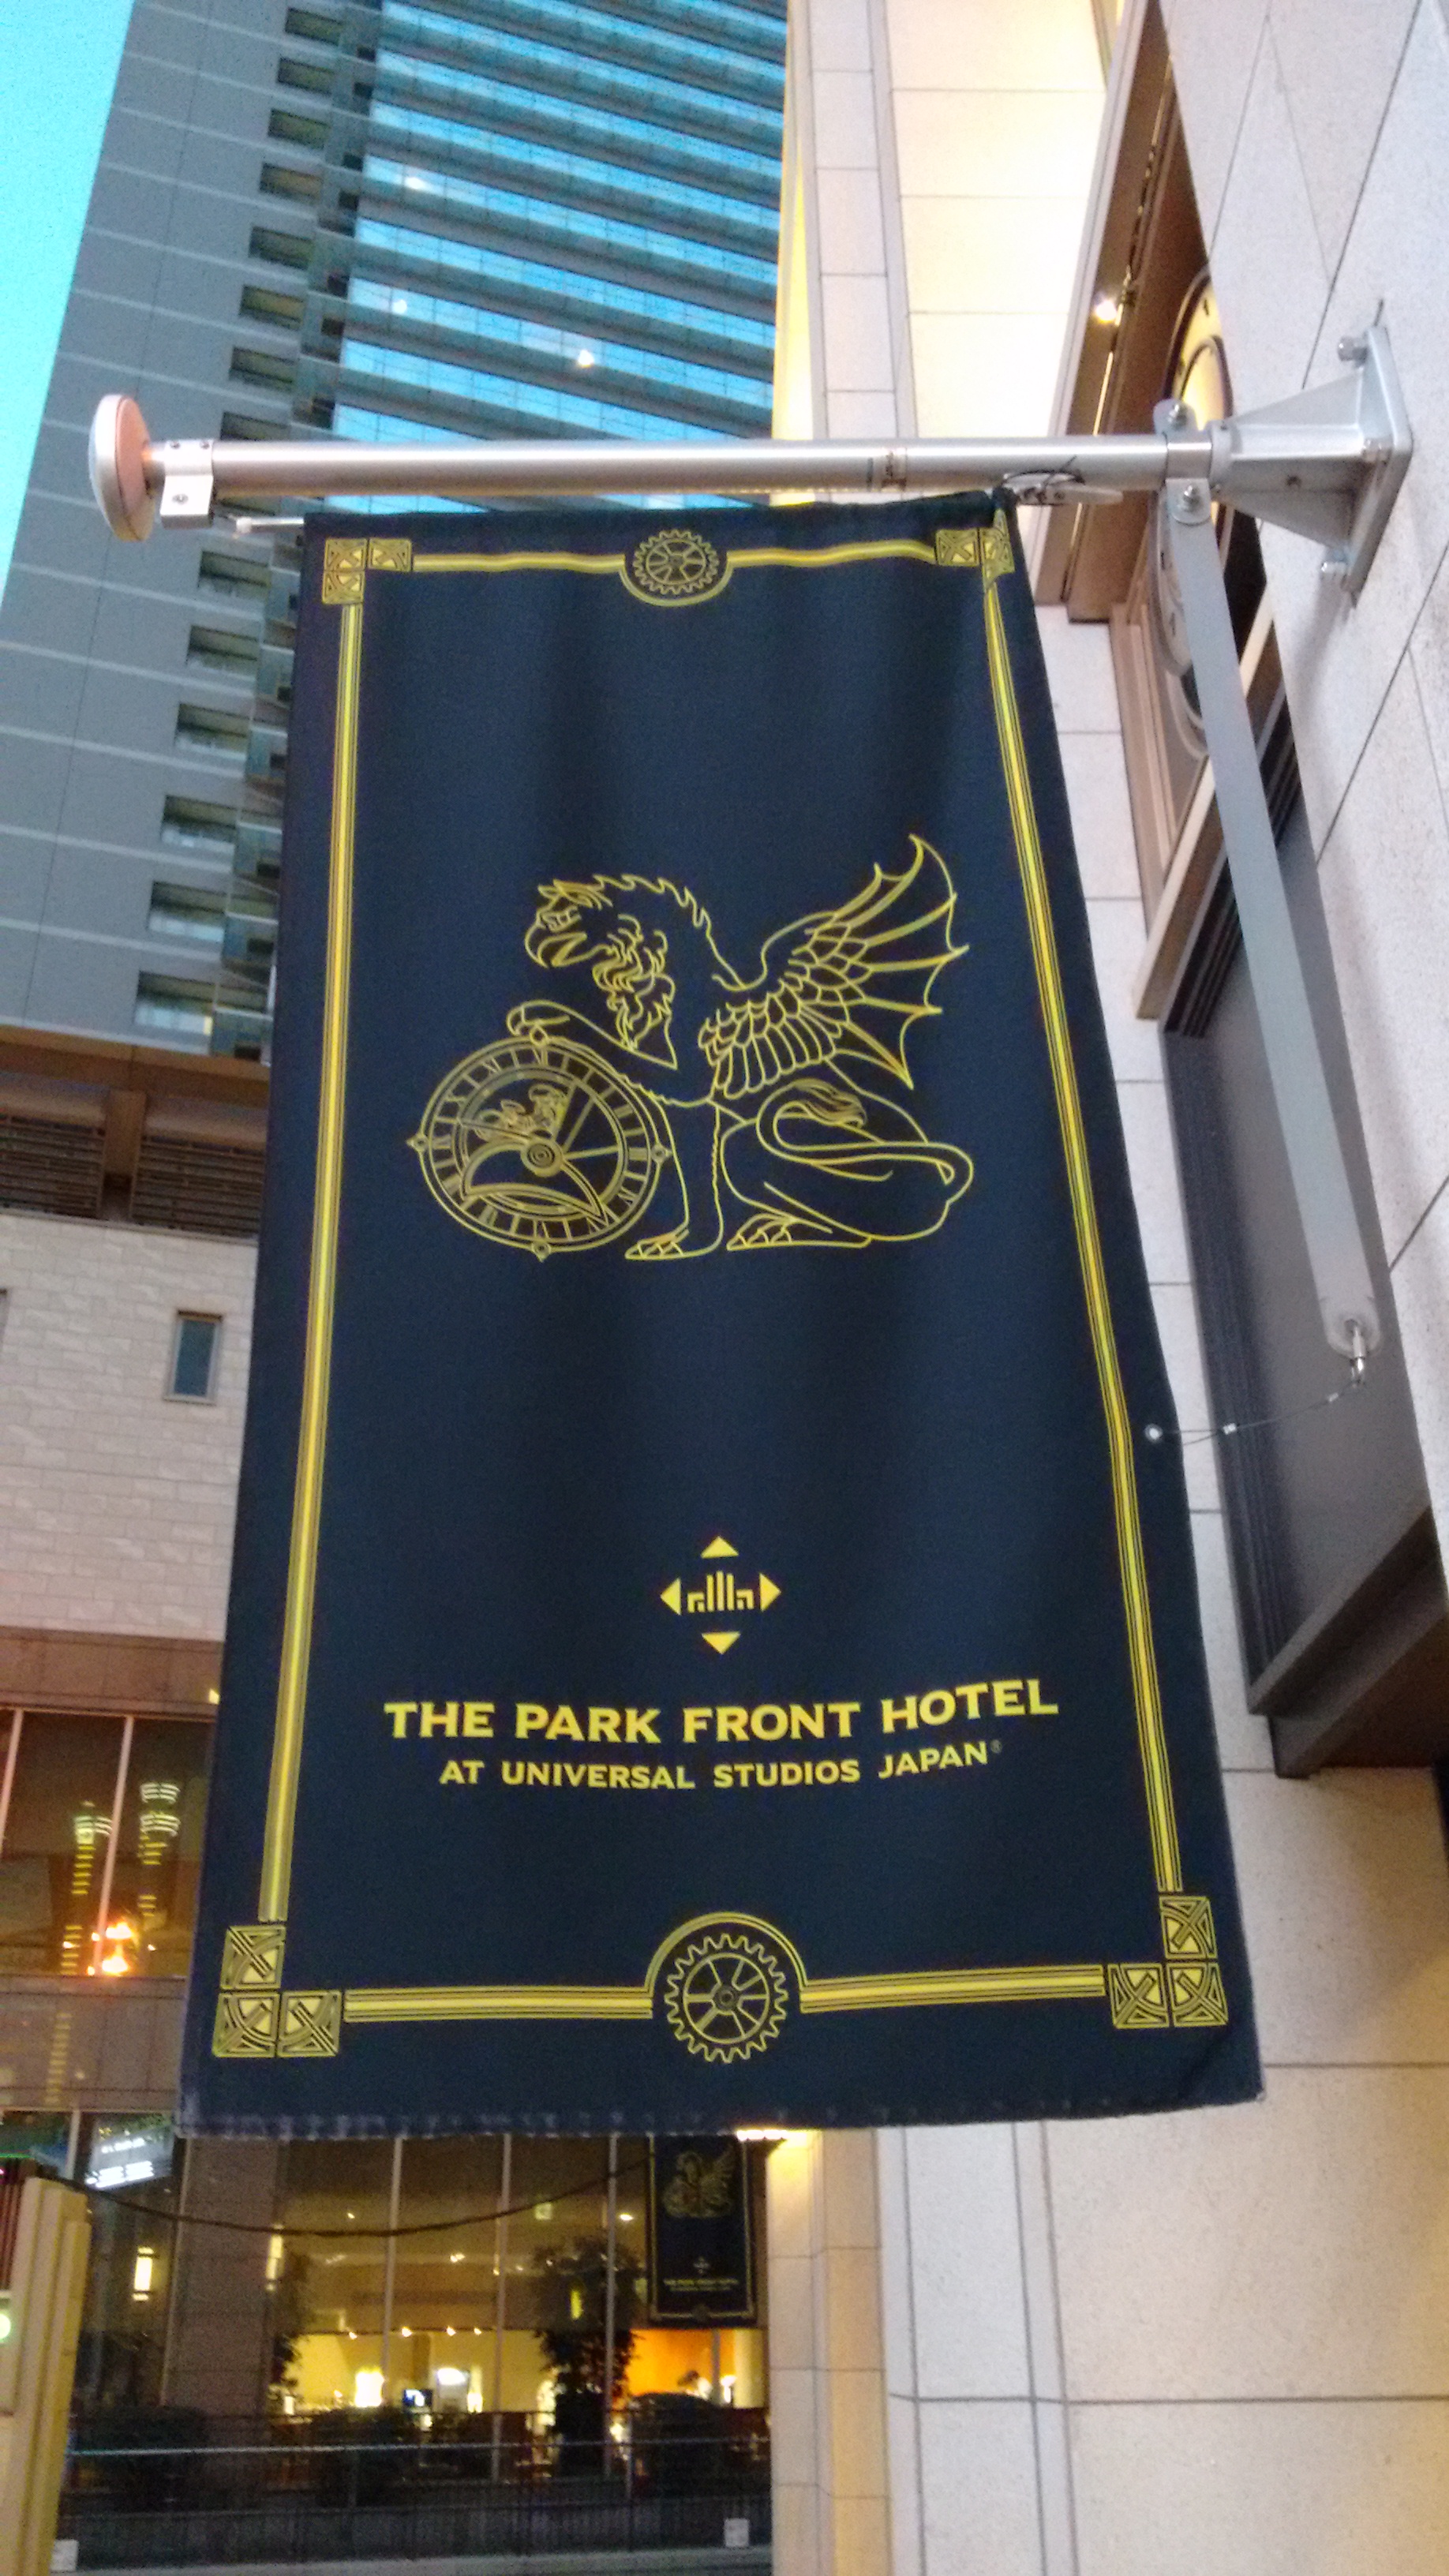 PARK FRONT HOTEL